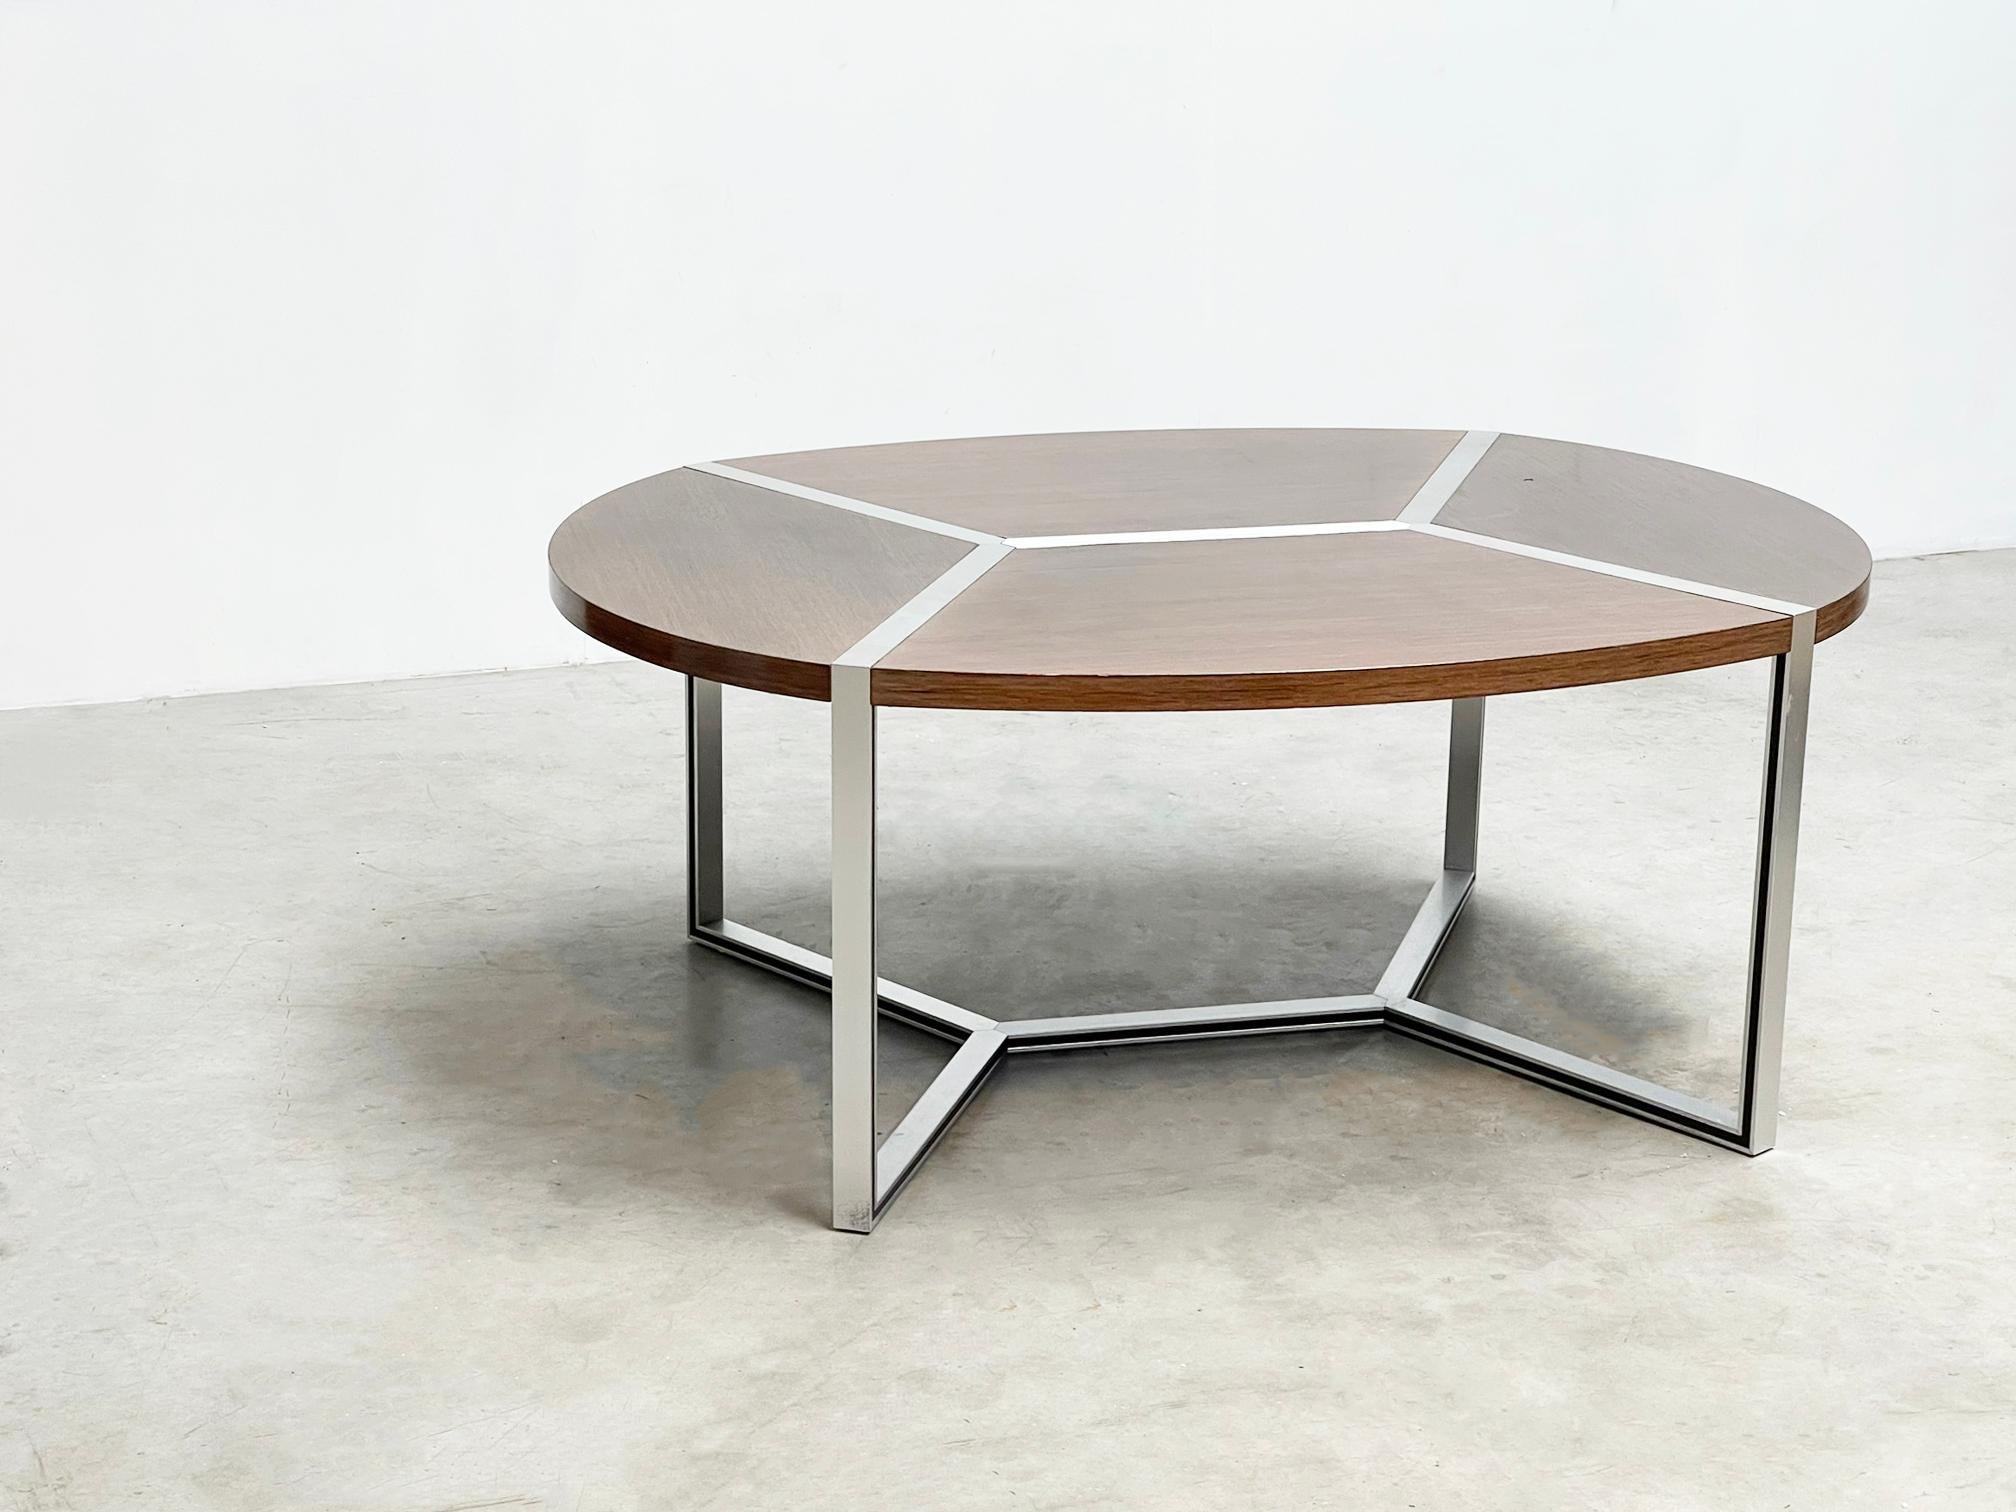 Geometrical Ligne Roset dining table
The geometric dining table from the 1980s, crafted by Ligne Roset and designed by Henri Lesetre and Claude Gaillard, embodies the era's fascination with sleek lines and bold forms. Its timeless appeal and